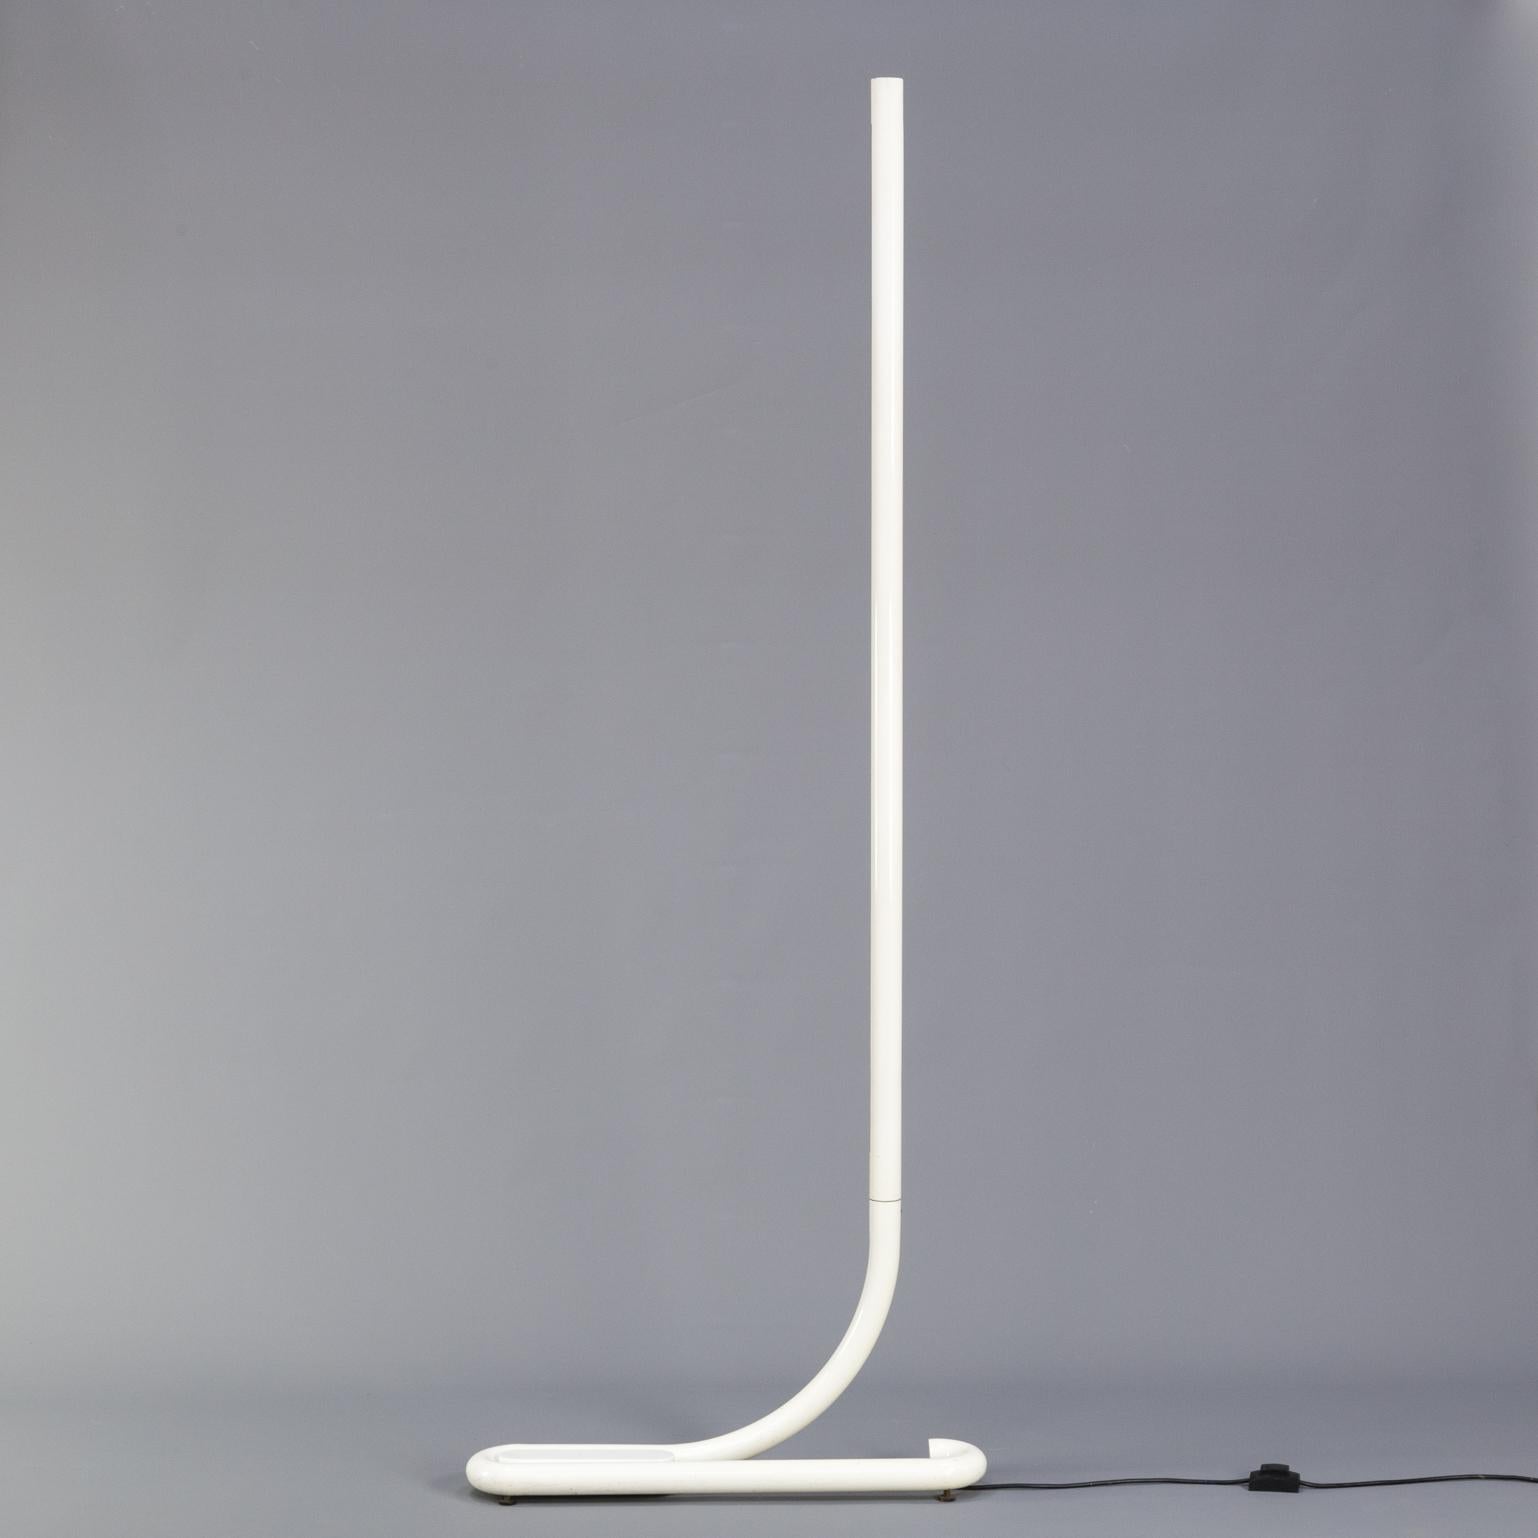 1970s Aldo van den Nieuwelaar TC2 tubular floor lamp for Artimeta. TC2 has been made in small numbers, this white version has only been in 127pce’s made. Good and working condition consistent with age and use.